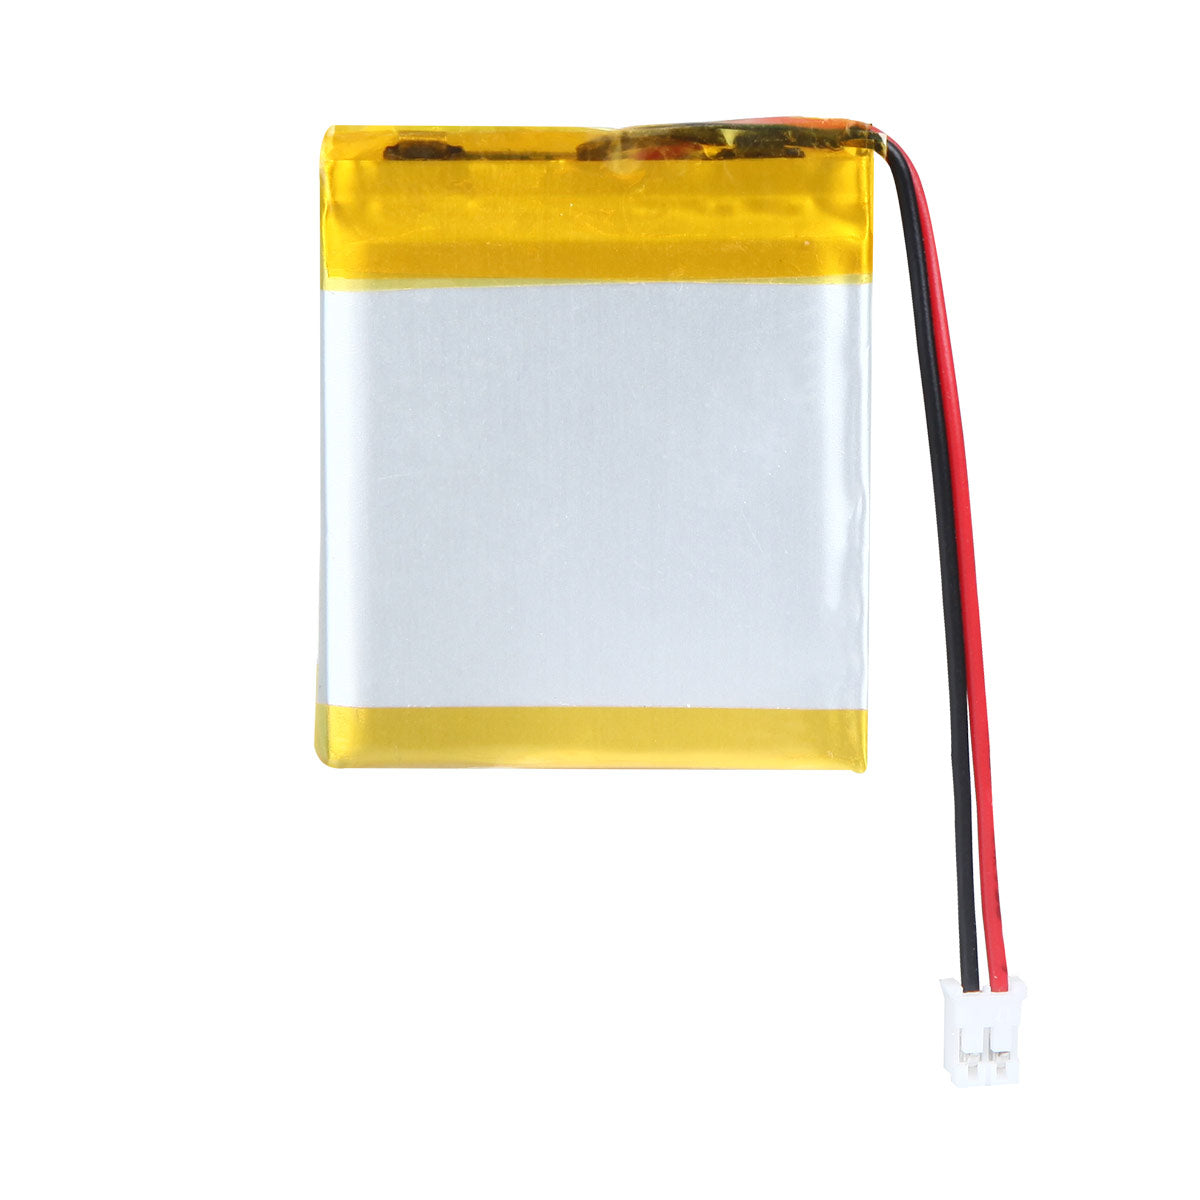 YDL 3.7V 1000mAh 553740 Rechargeable Lithium Polymer Battery Length 42mm